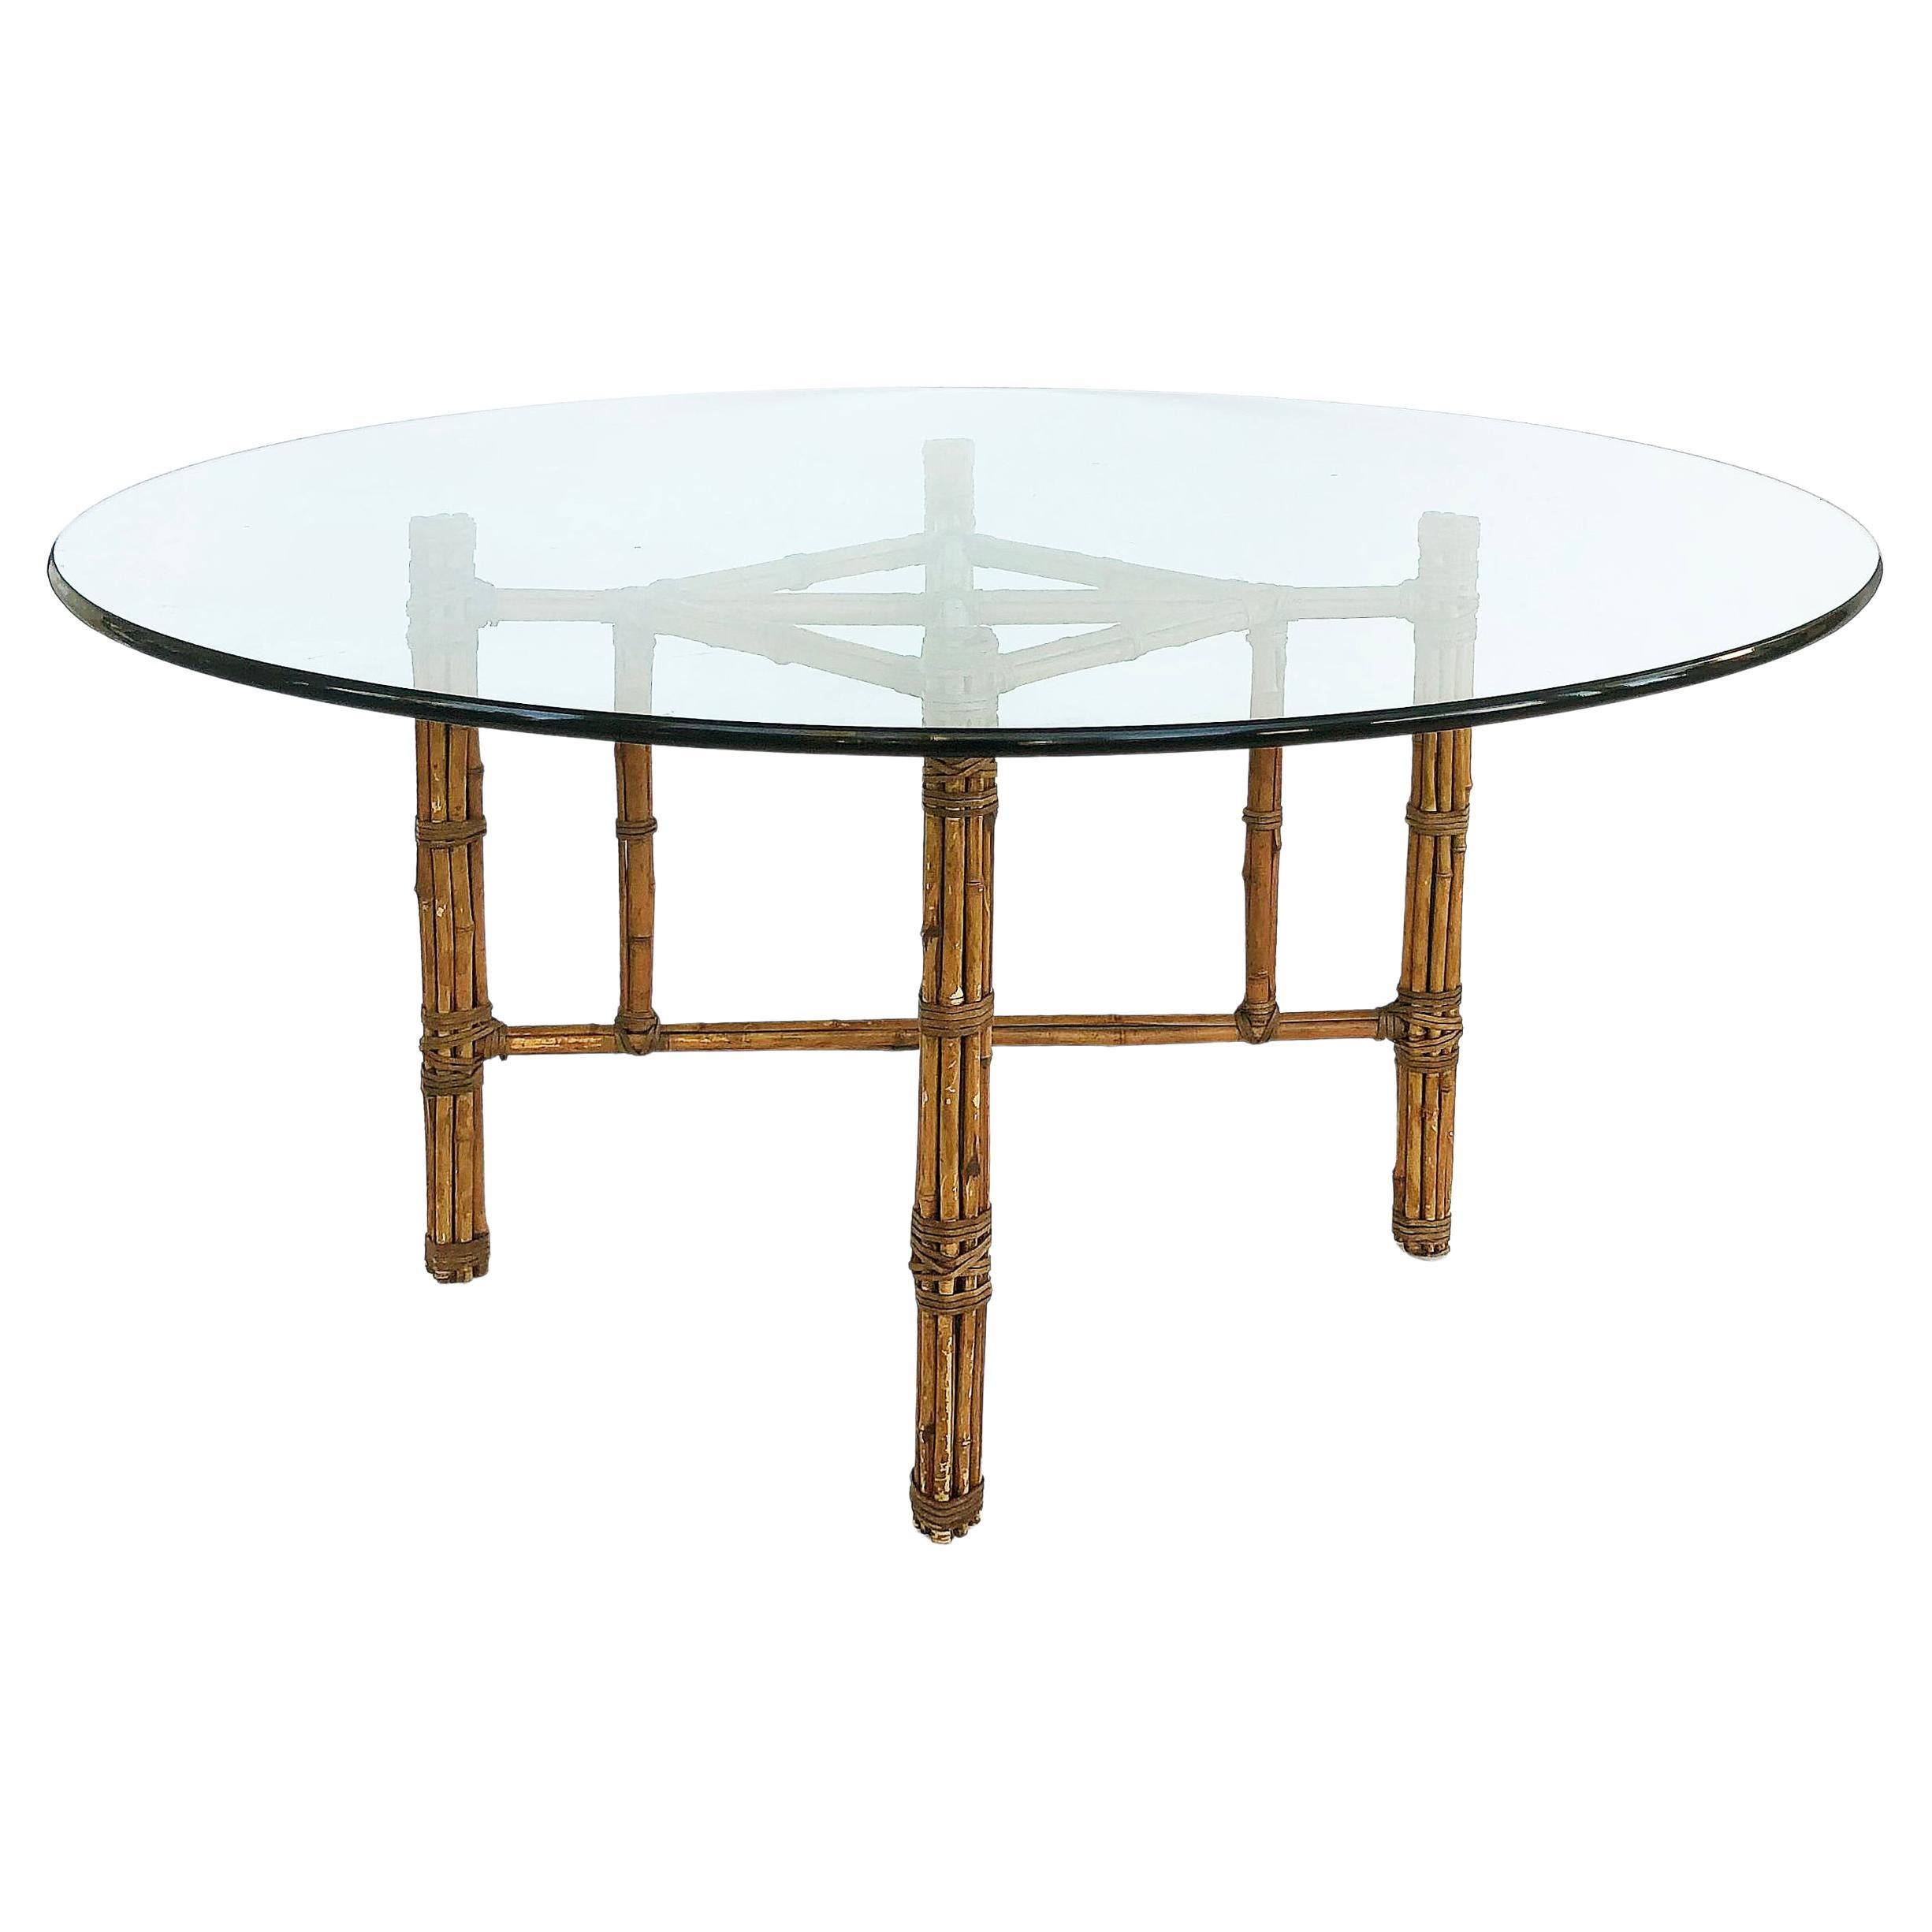 McGuire San Francisco Bamboo, Rawhide Dining Table with Glass Top